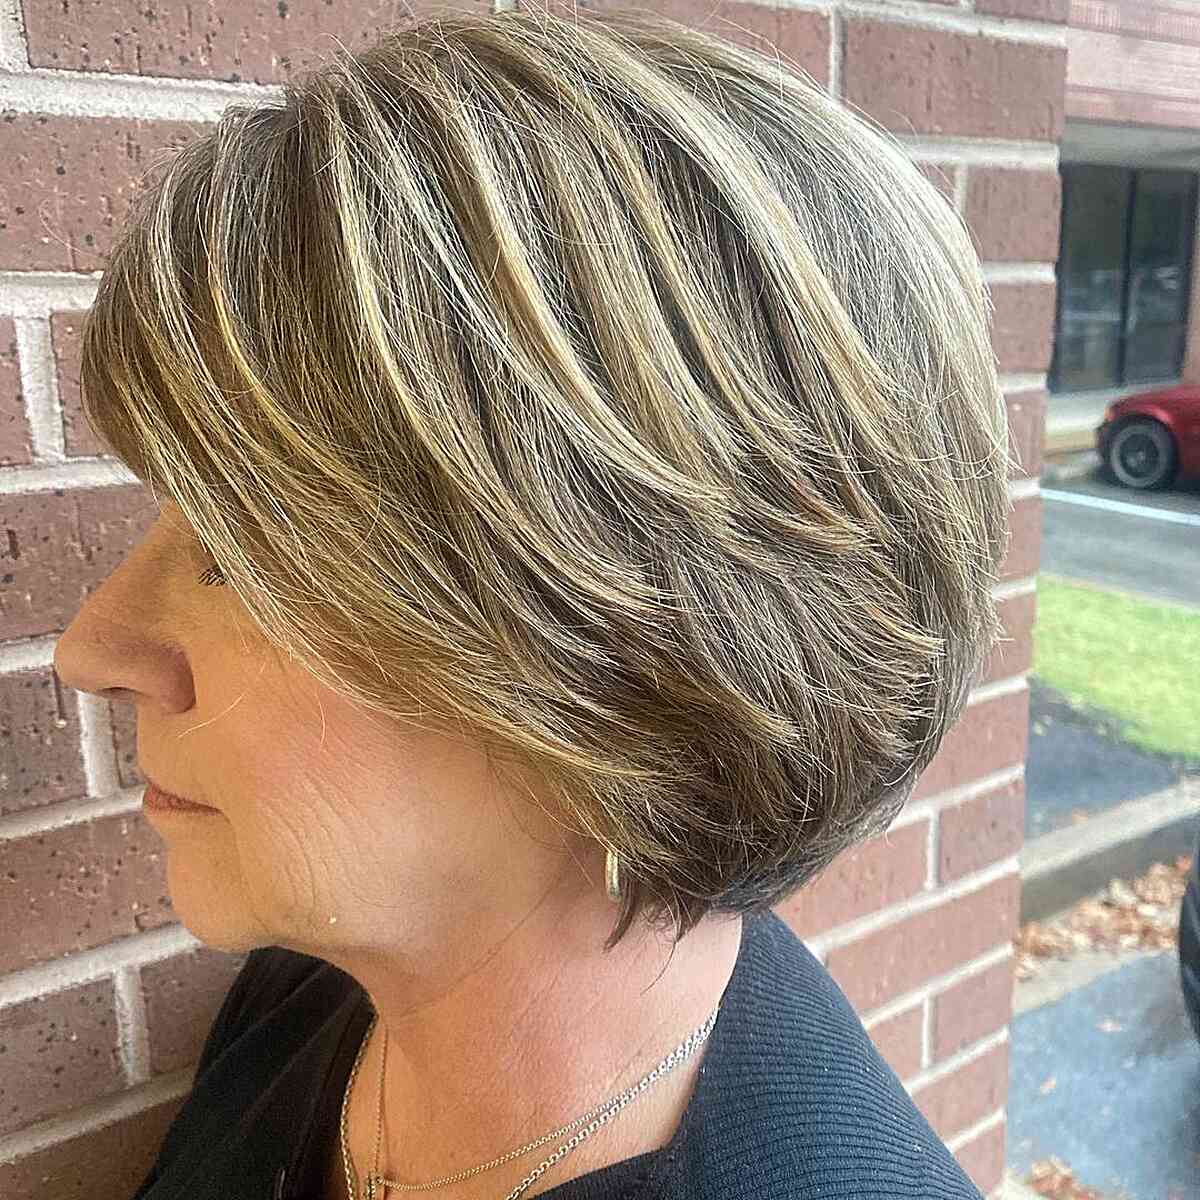 Chin-Length Choppy Round Bob with Shorter Layers and Side Bangs for Ladies over 60